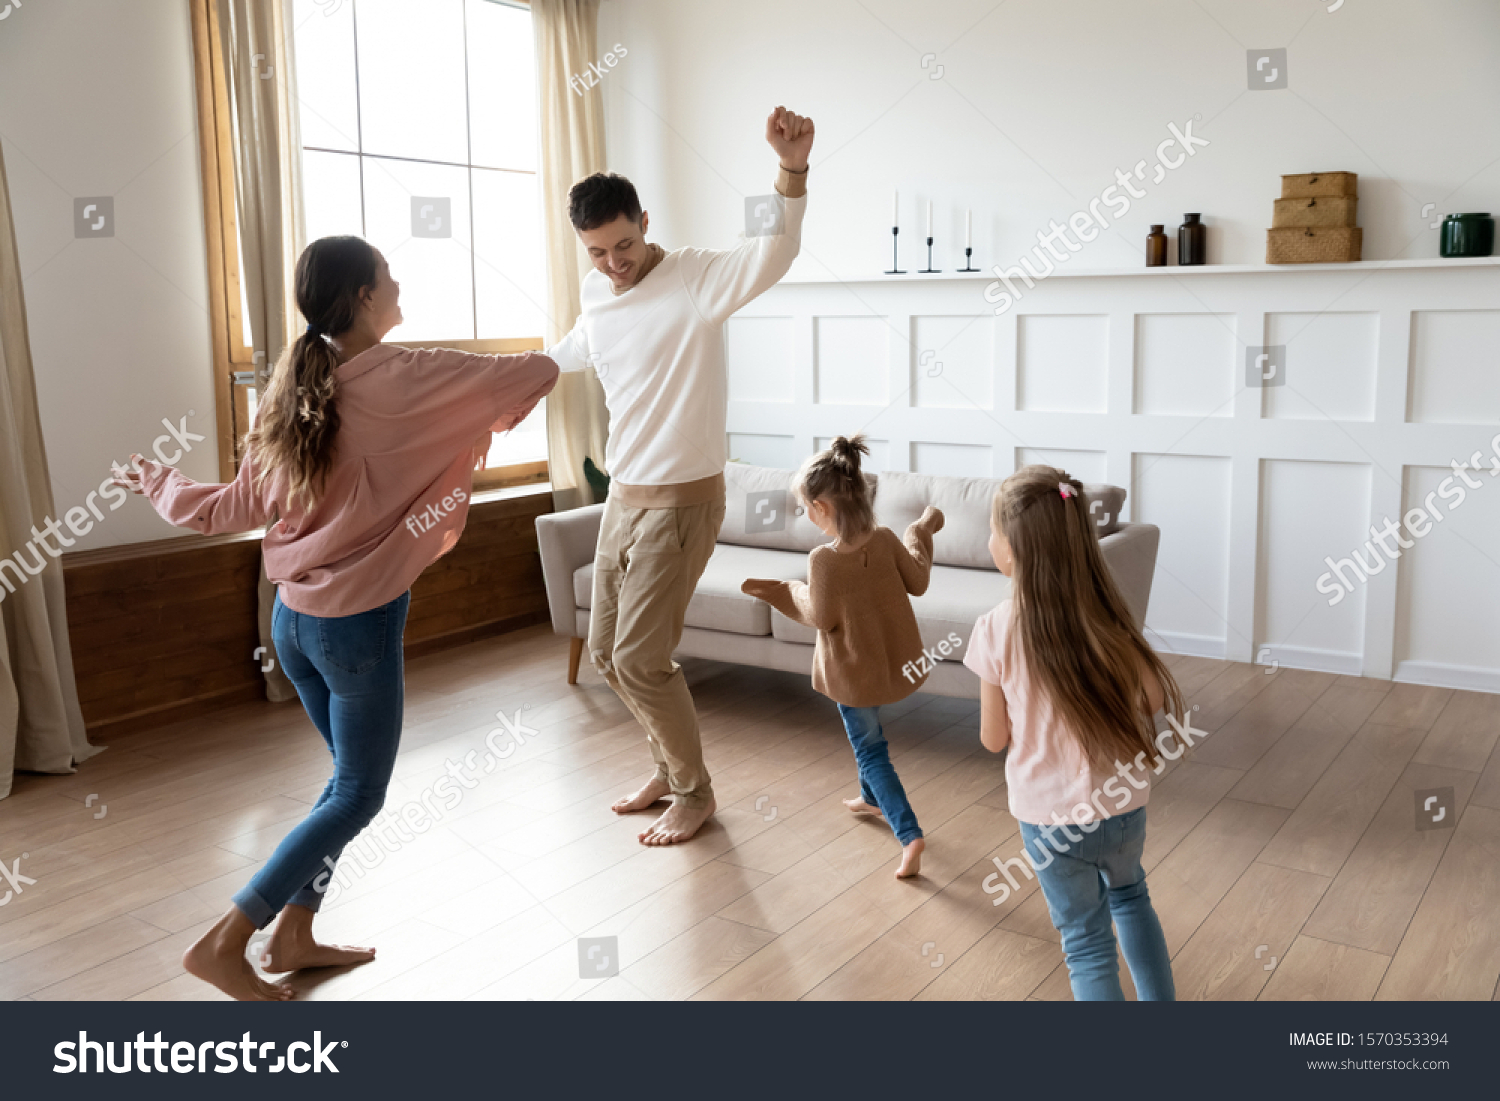 Funny active family of four young adult parents and cute small children daughters dancing together in living room interior, carefree little kids with mum dad having fun laughing enjoy leisure at home #1570353394